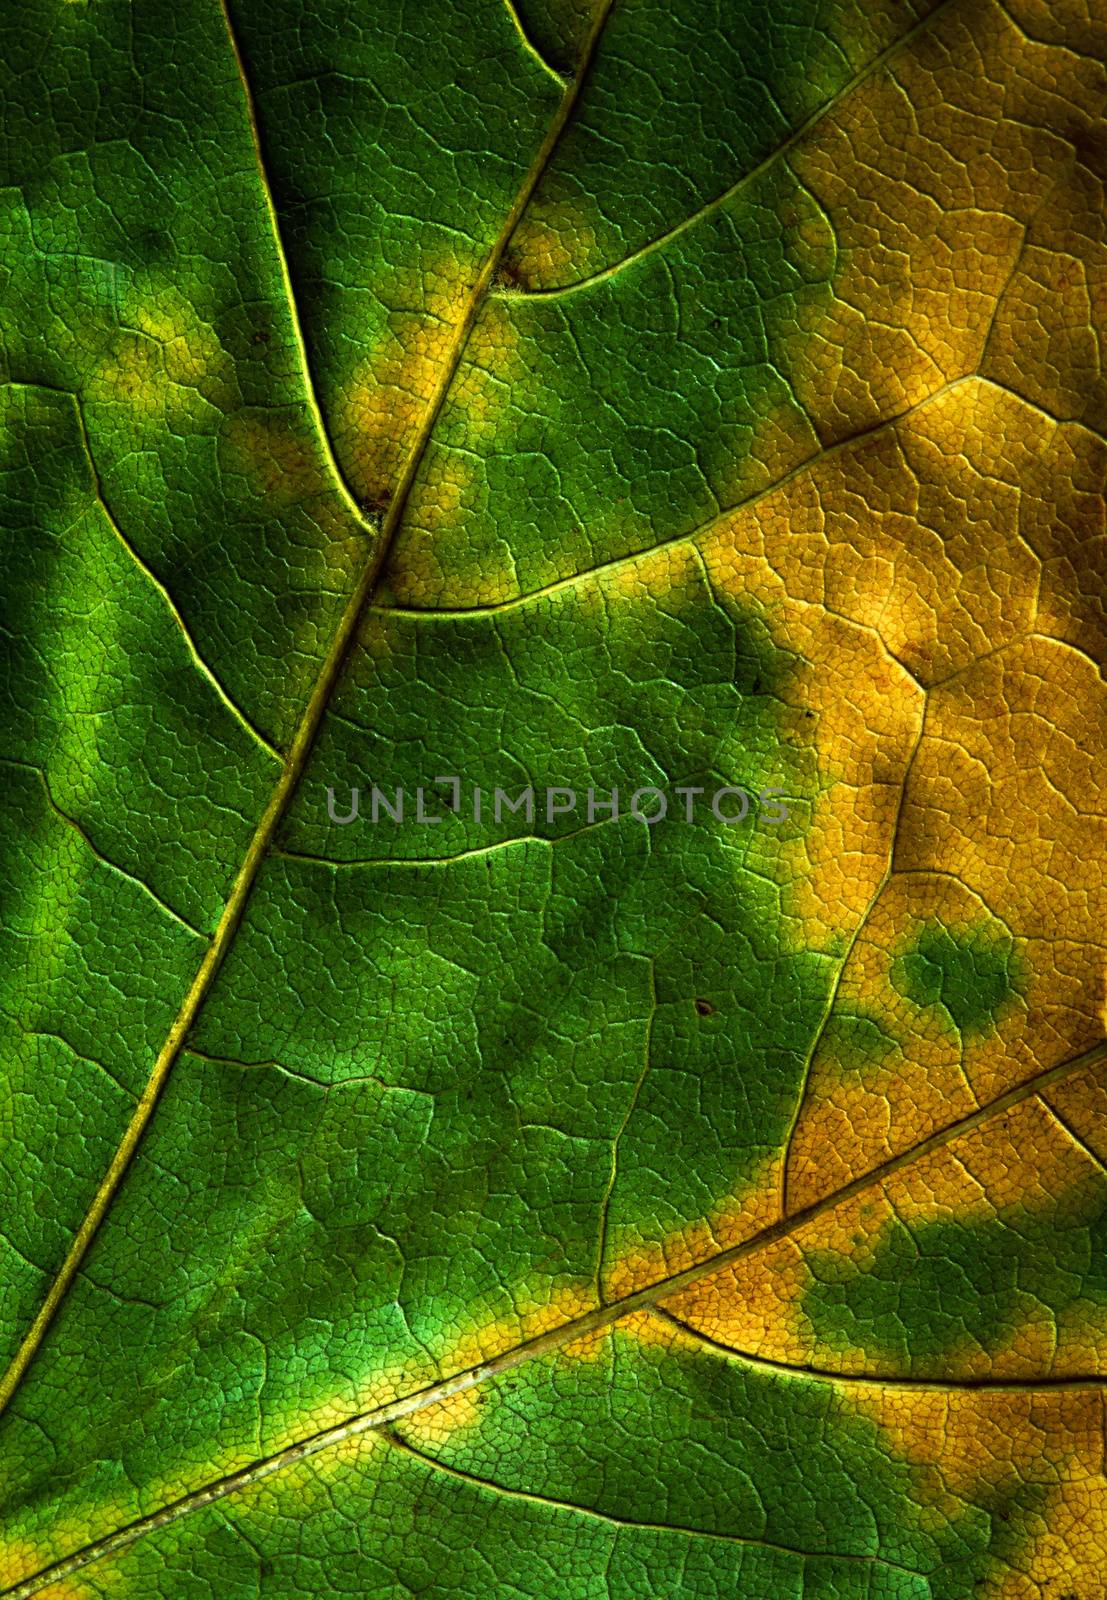 abstract background or texture detail of autumn leaves on a tree